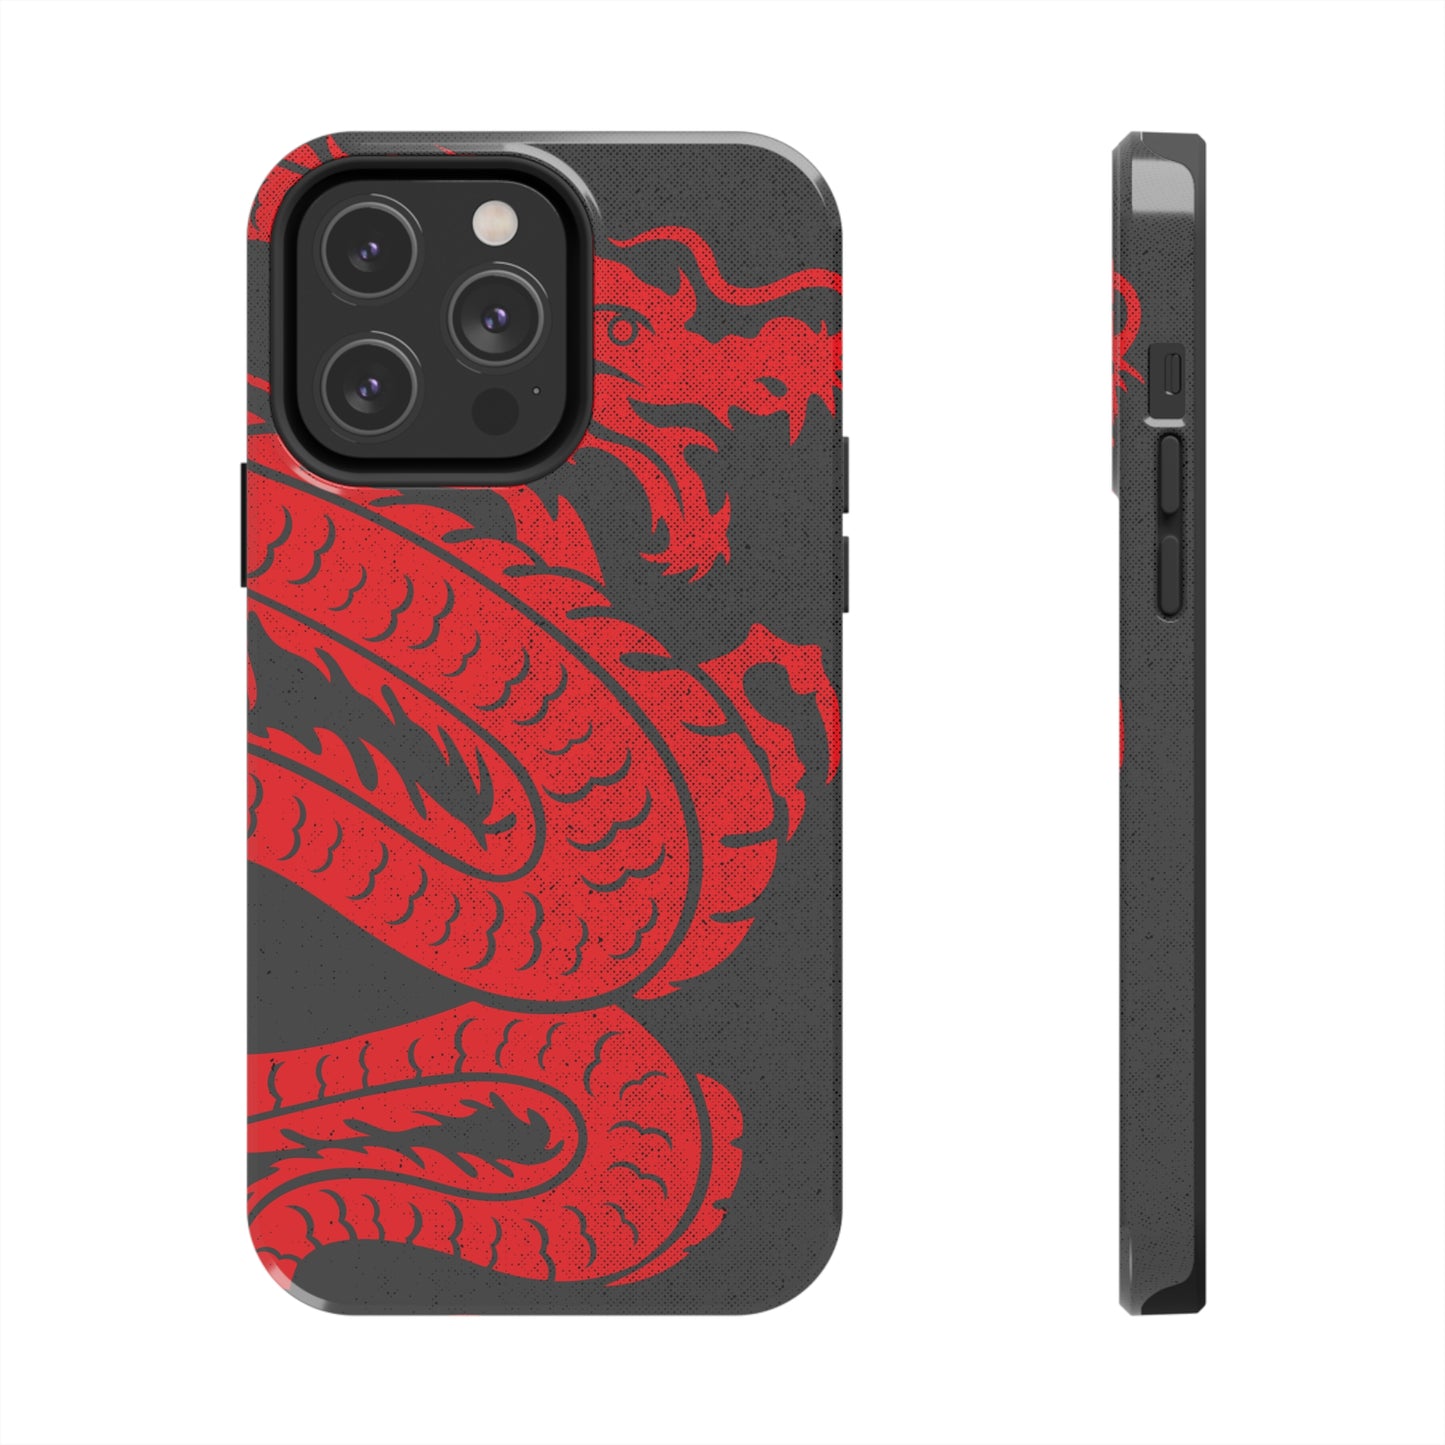 Red Dragon Tough iPhone Cases